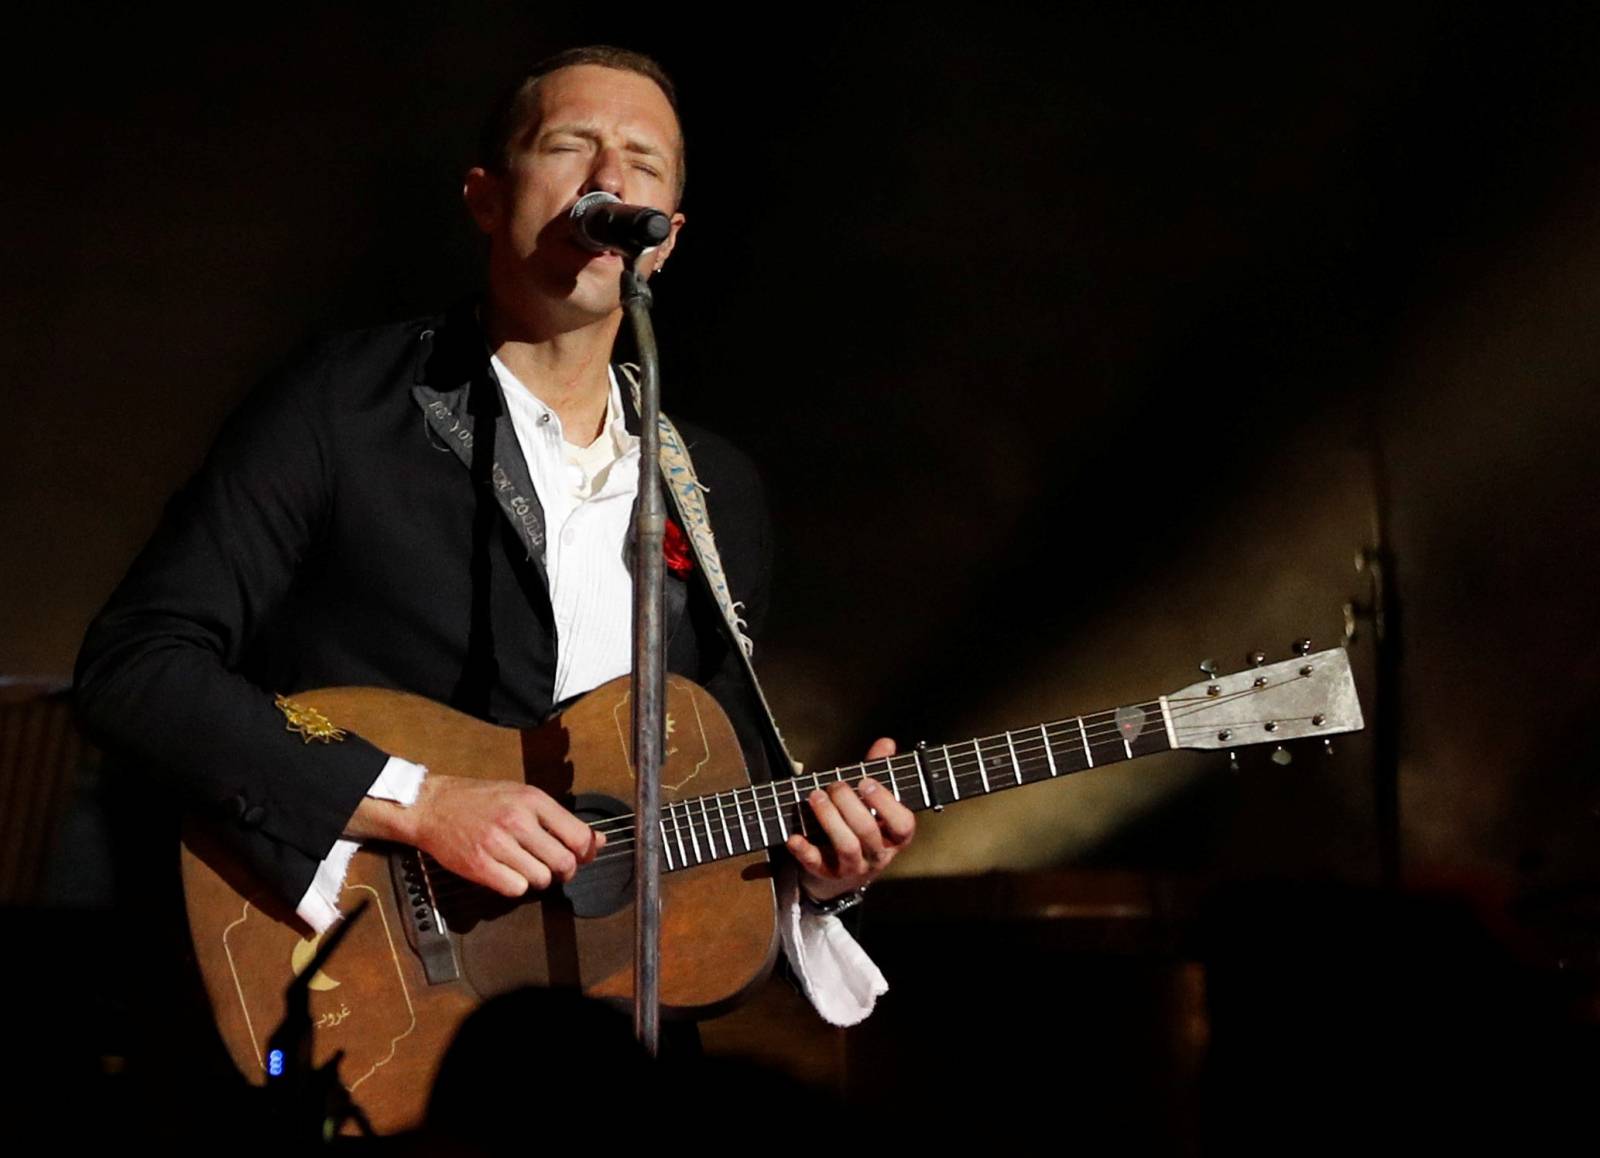 Coldplay performs at the Natural History Museum in London